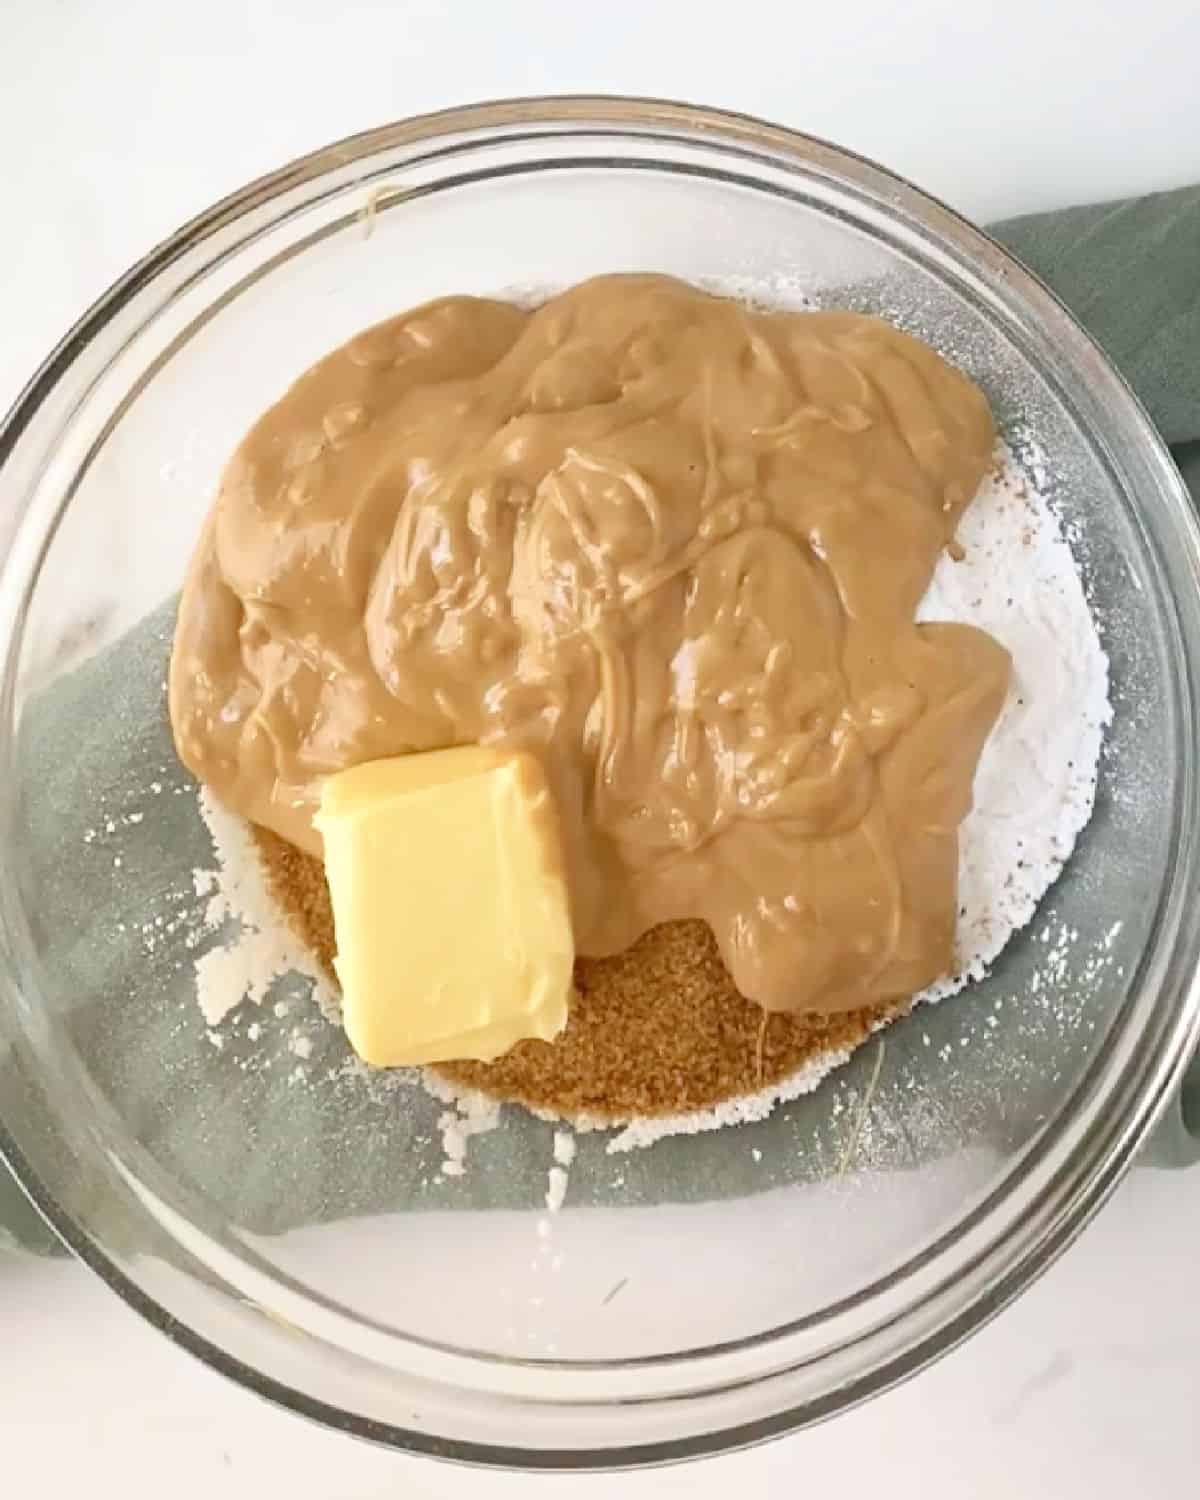 Peanut butter, butter, and powdered sugar in a glass bowl on a green cloth and white surface. 